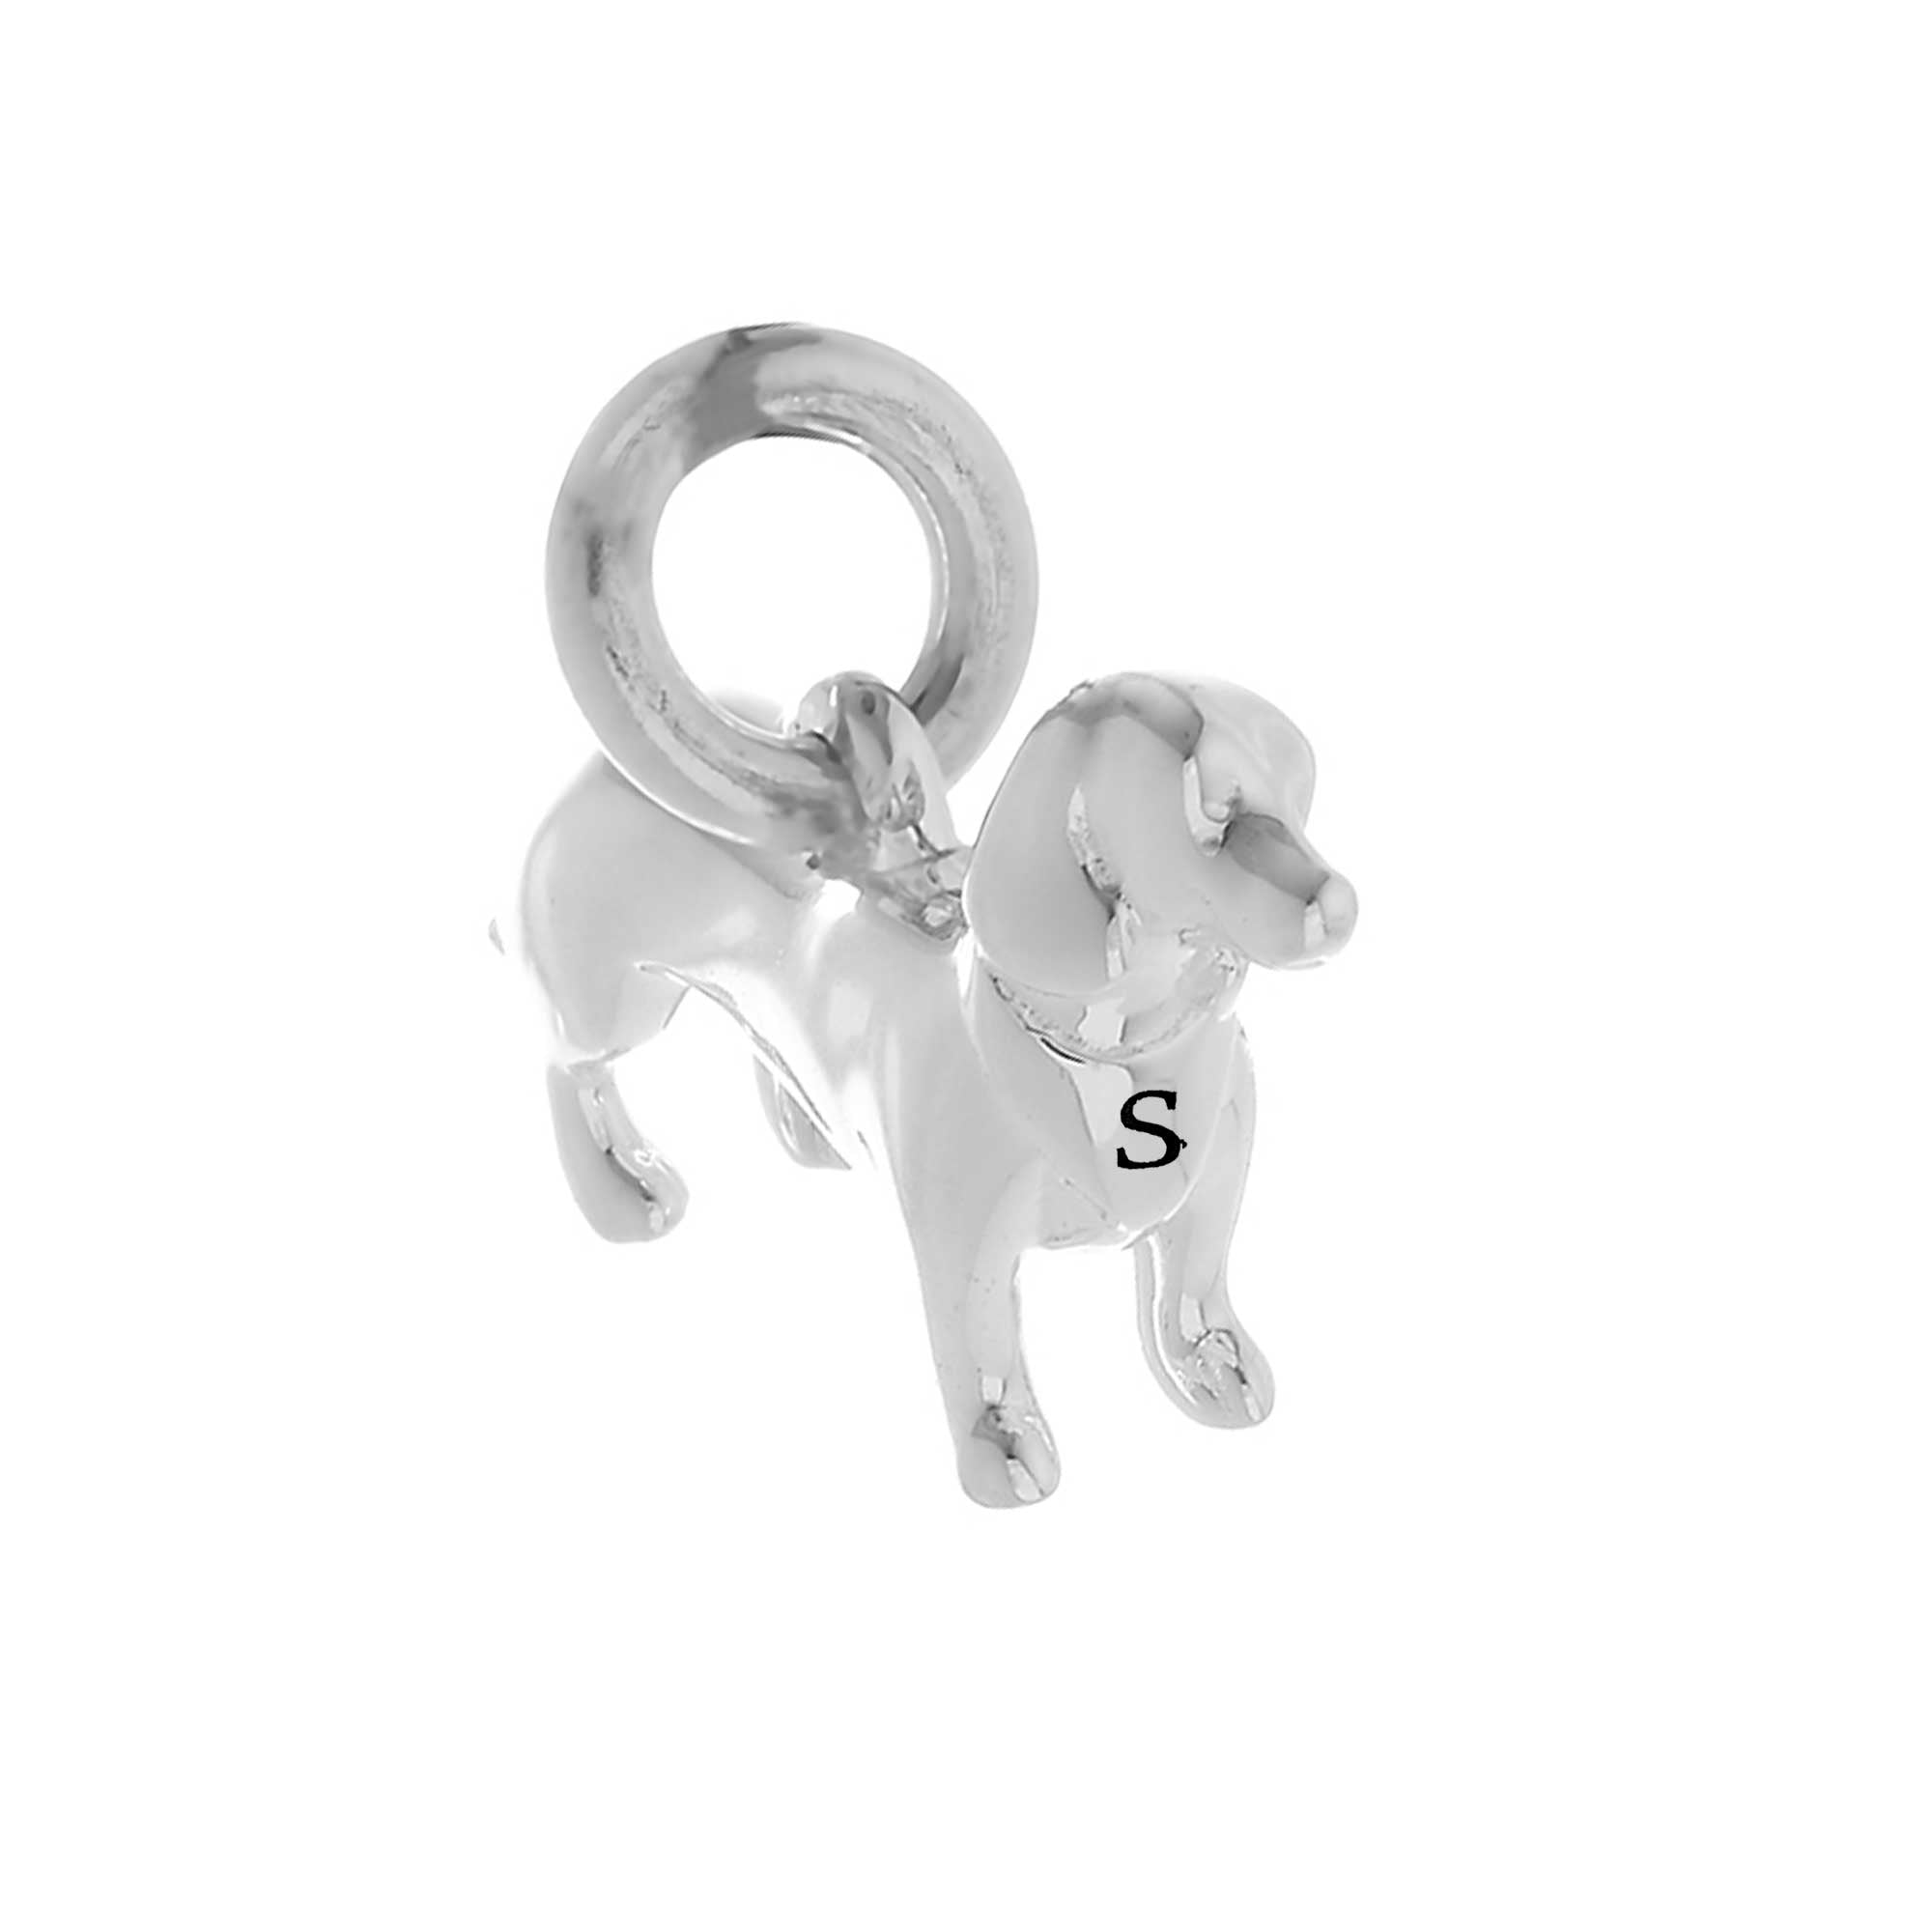 sausage dog dachshund personalized engraved silver charm for bracelet necklace scarlett jewellery